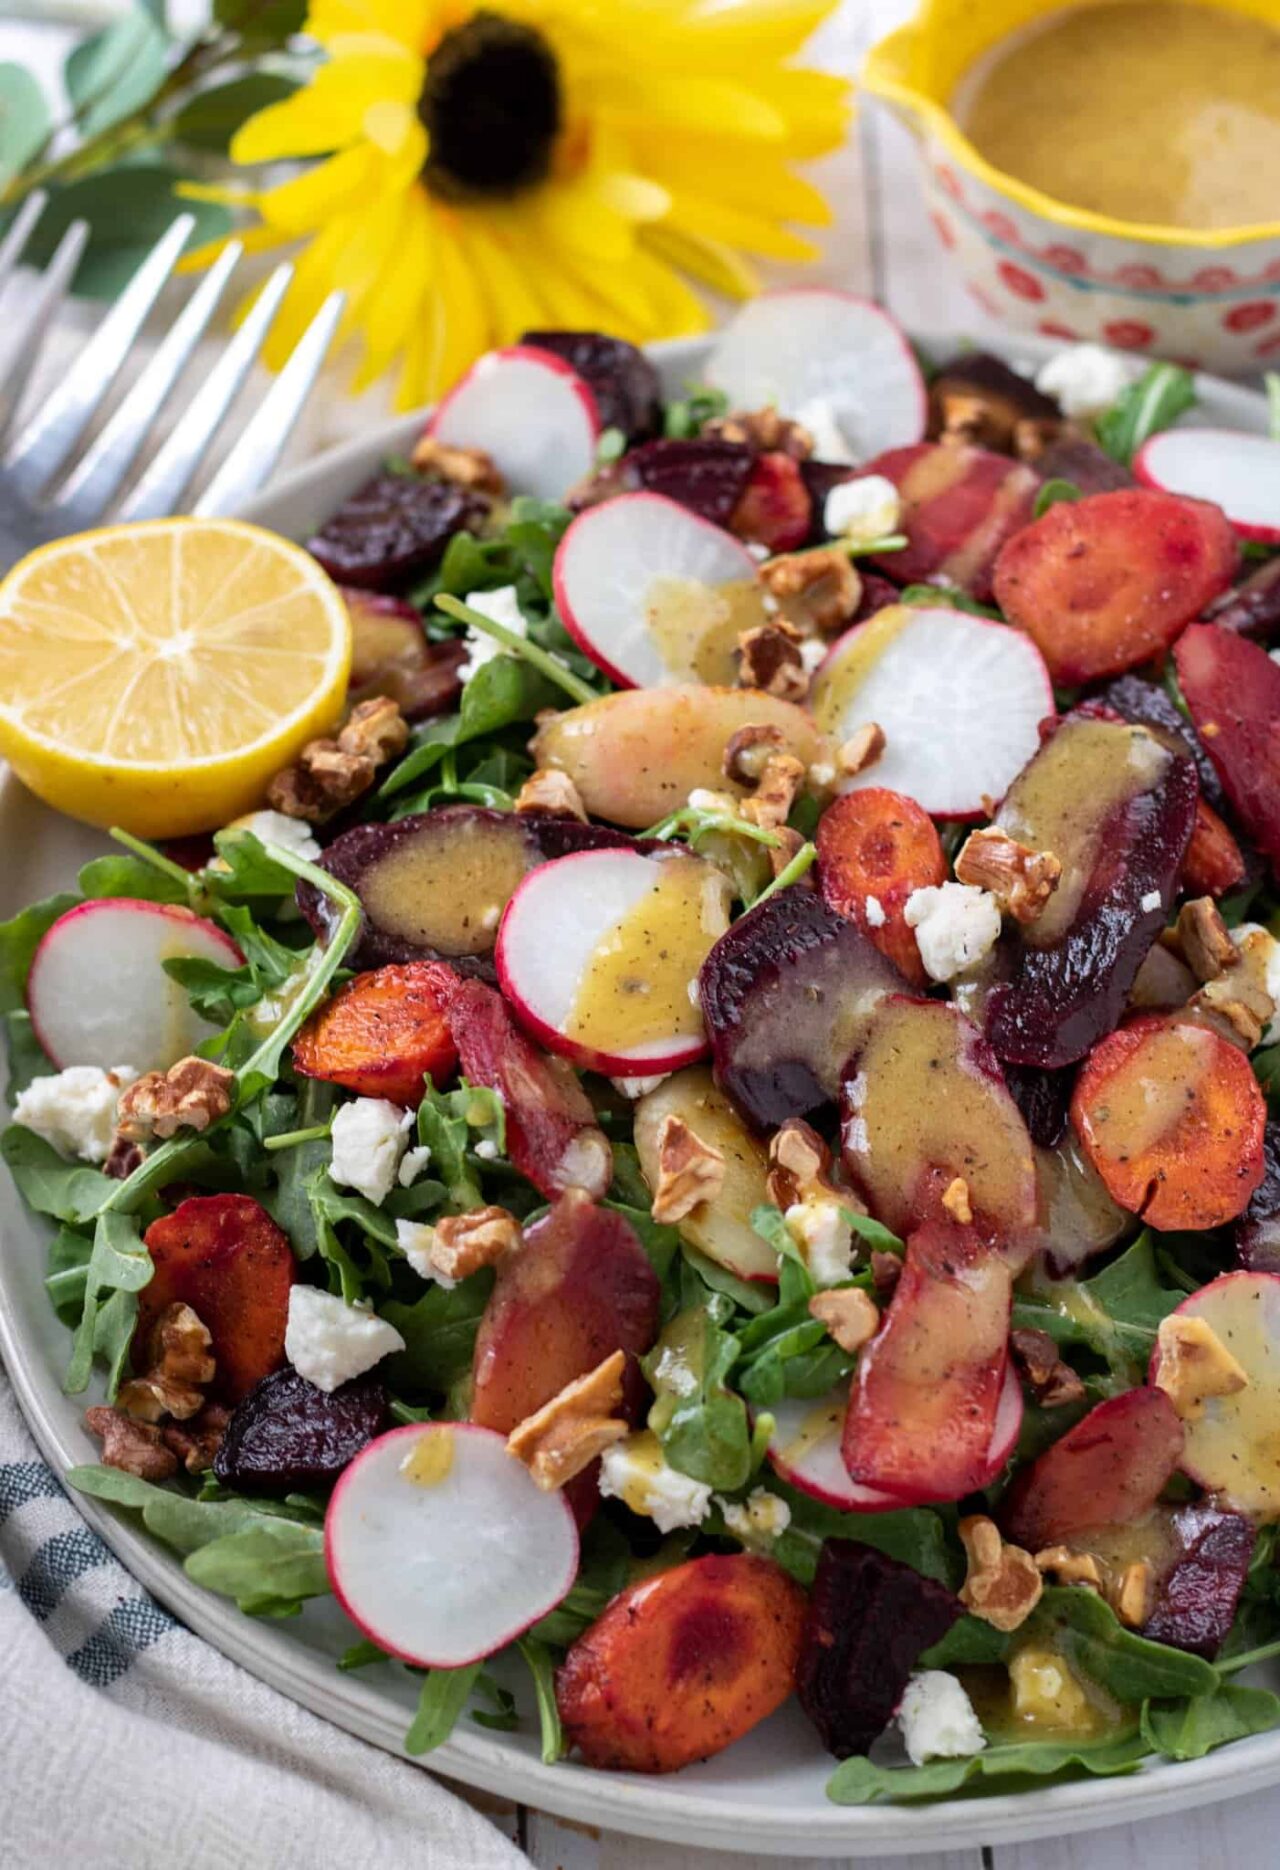 A large platter topped with a colorful arugula salad that has sliced radishes, goat cheese crumbles, toasted walnuts, roasted beets and rainbow carrots. There's a halved lemon on the side. A yellow daisy flower is in the background next to a small bowl of salad dressing.